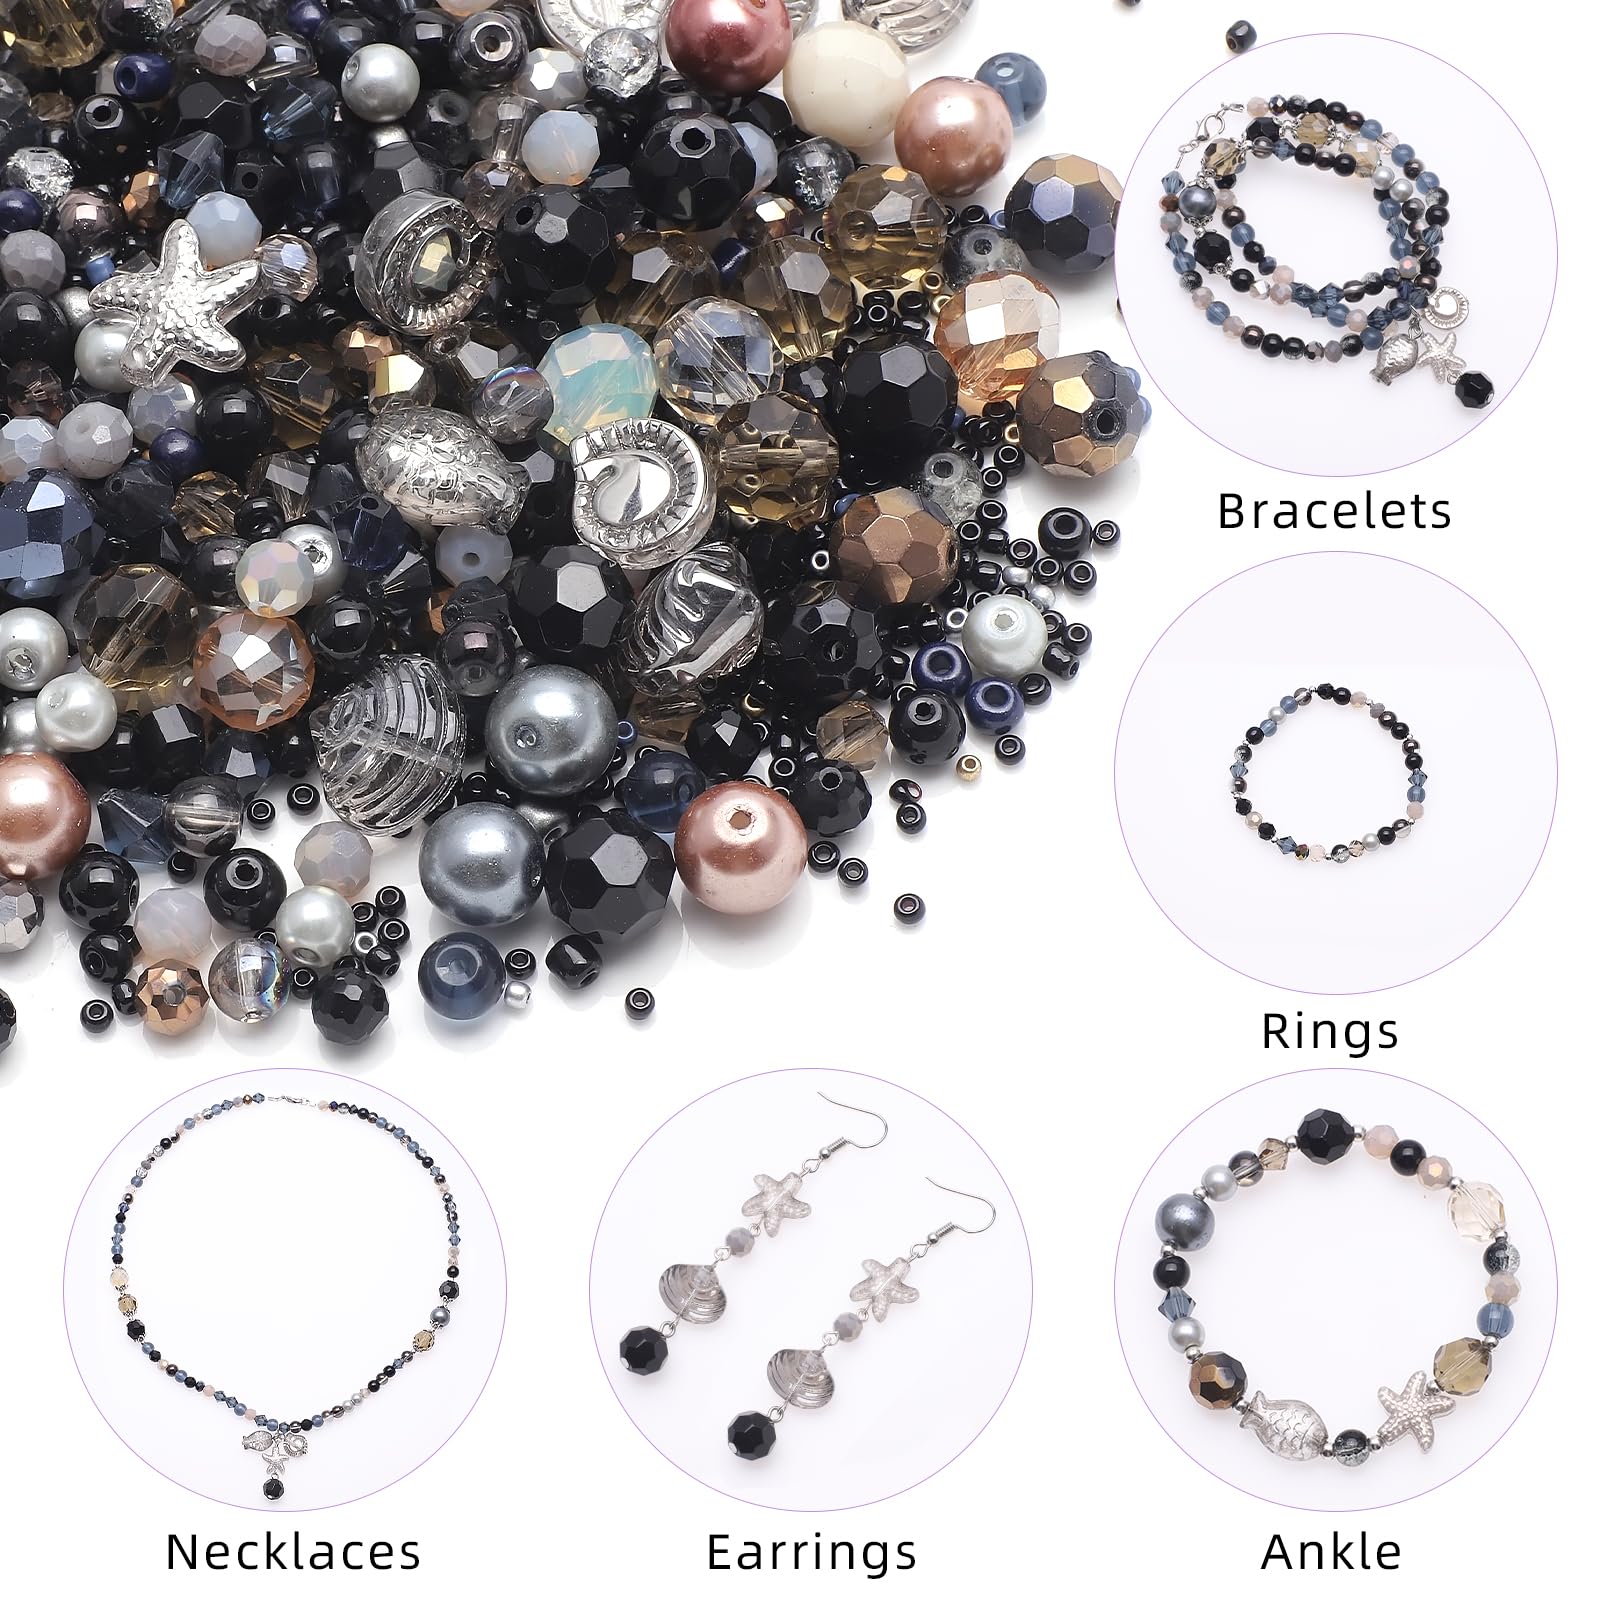 KINGSHINE 870pcs Assorted Crystal Jewelry Beads Drilled Gemstone Loose Beads Clear Crystal Glass Beads for Crafts Faceted Shiny Bead for Jewelry Making DIY Necklace Bracelet Earring Kit (Black Color)